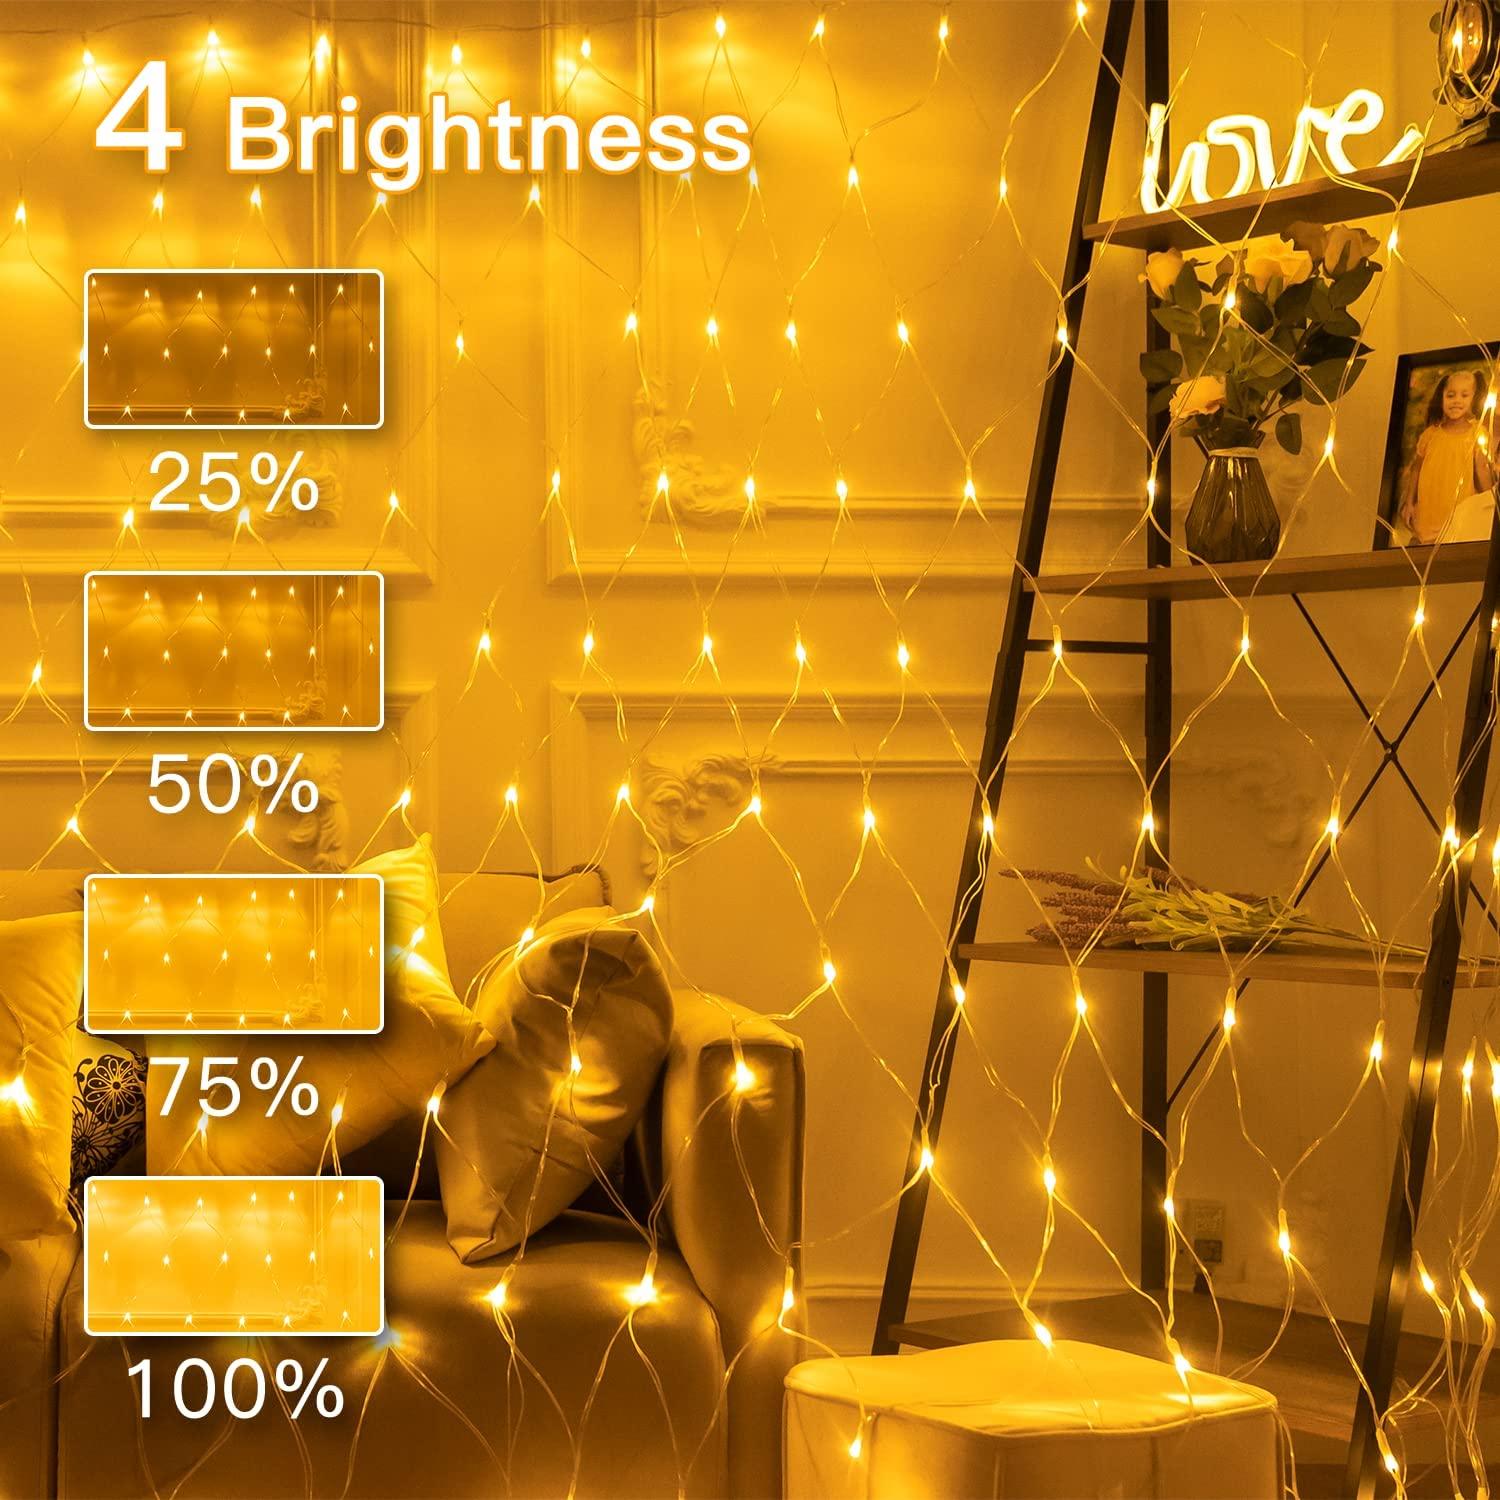 Christmas Net Lights 200 LED 9.8x6.6ft Outdoor Mesh Lights Connectable Waterproof 8 Modes&Timer Remote - Lasercutwraps Shop